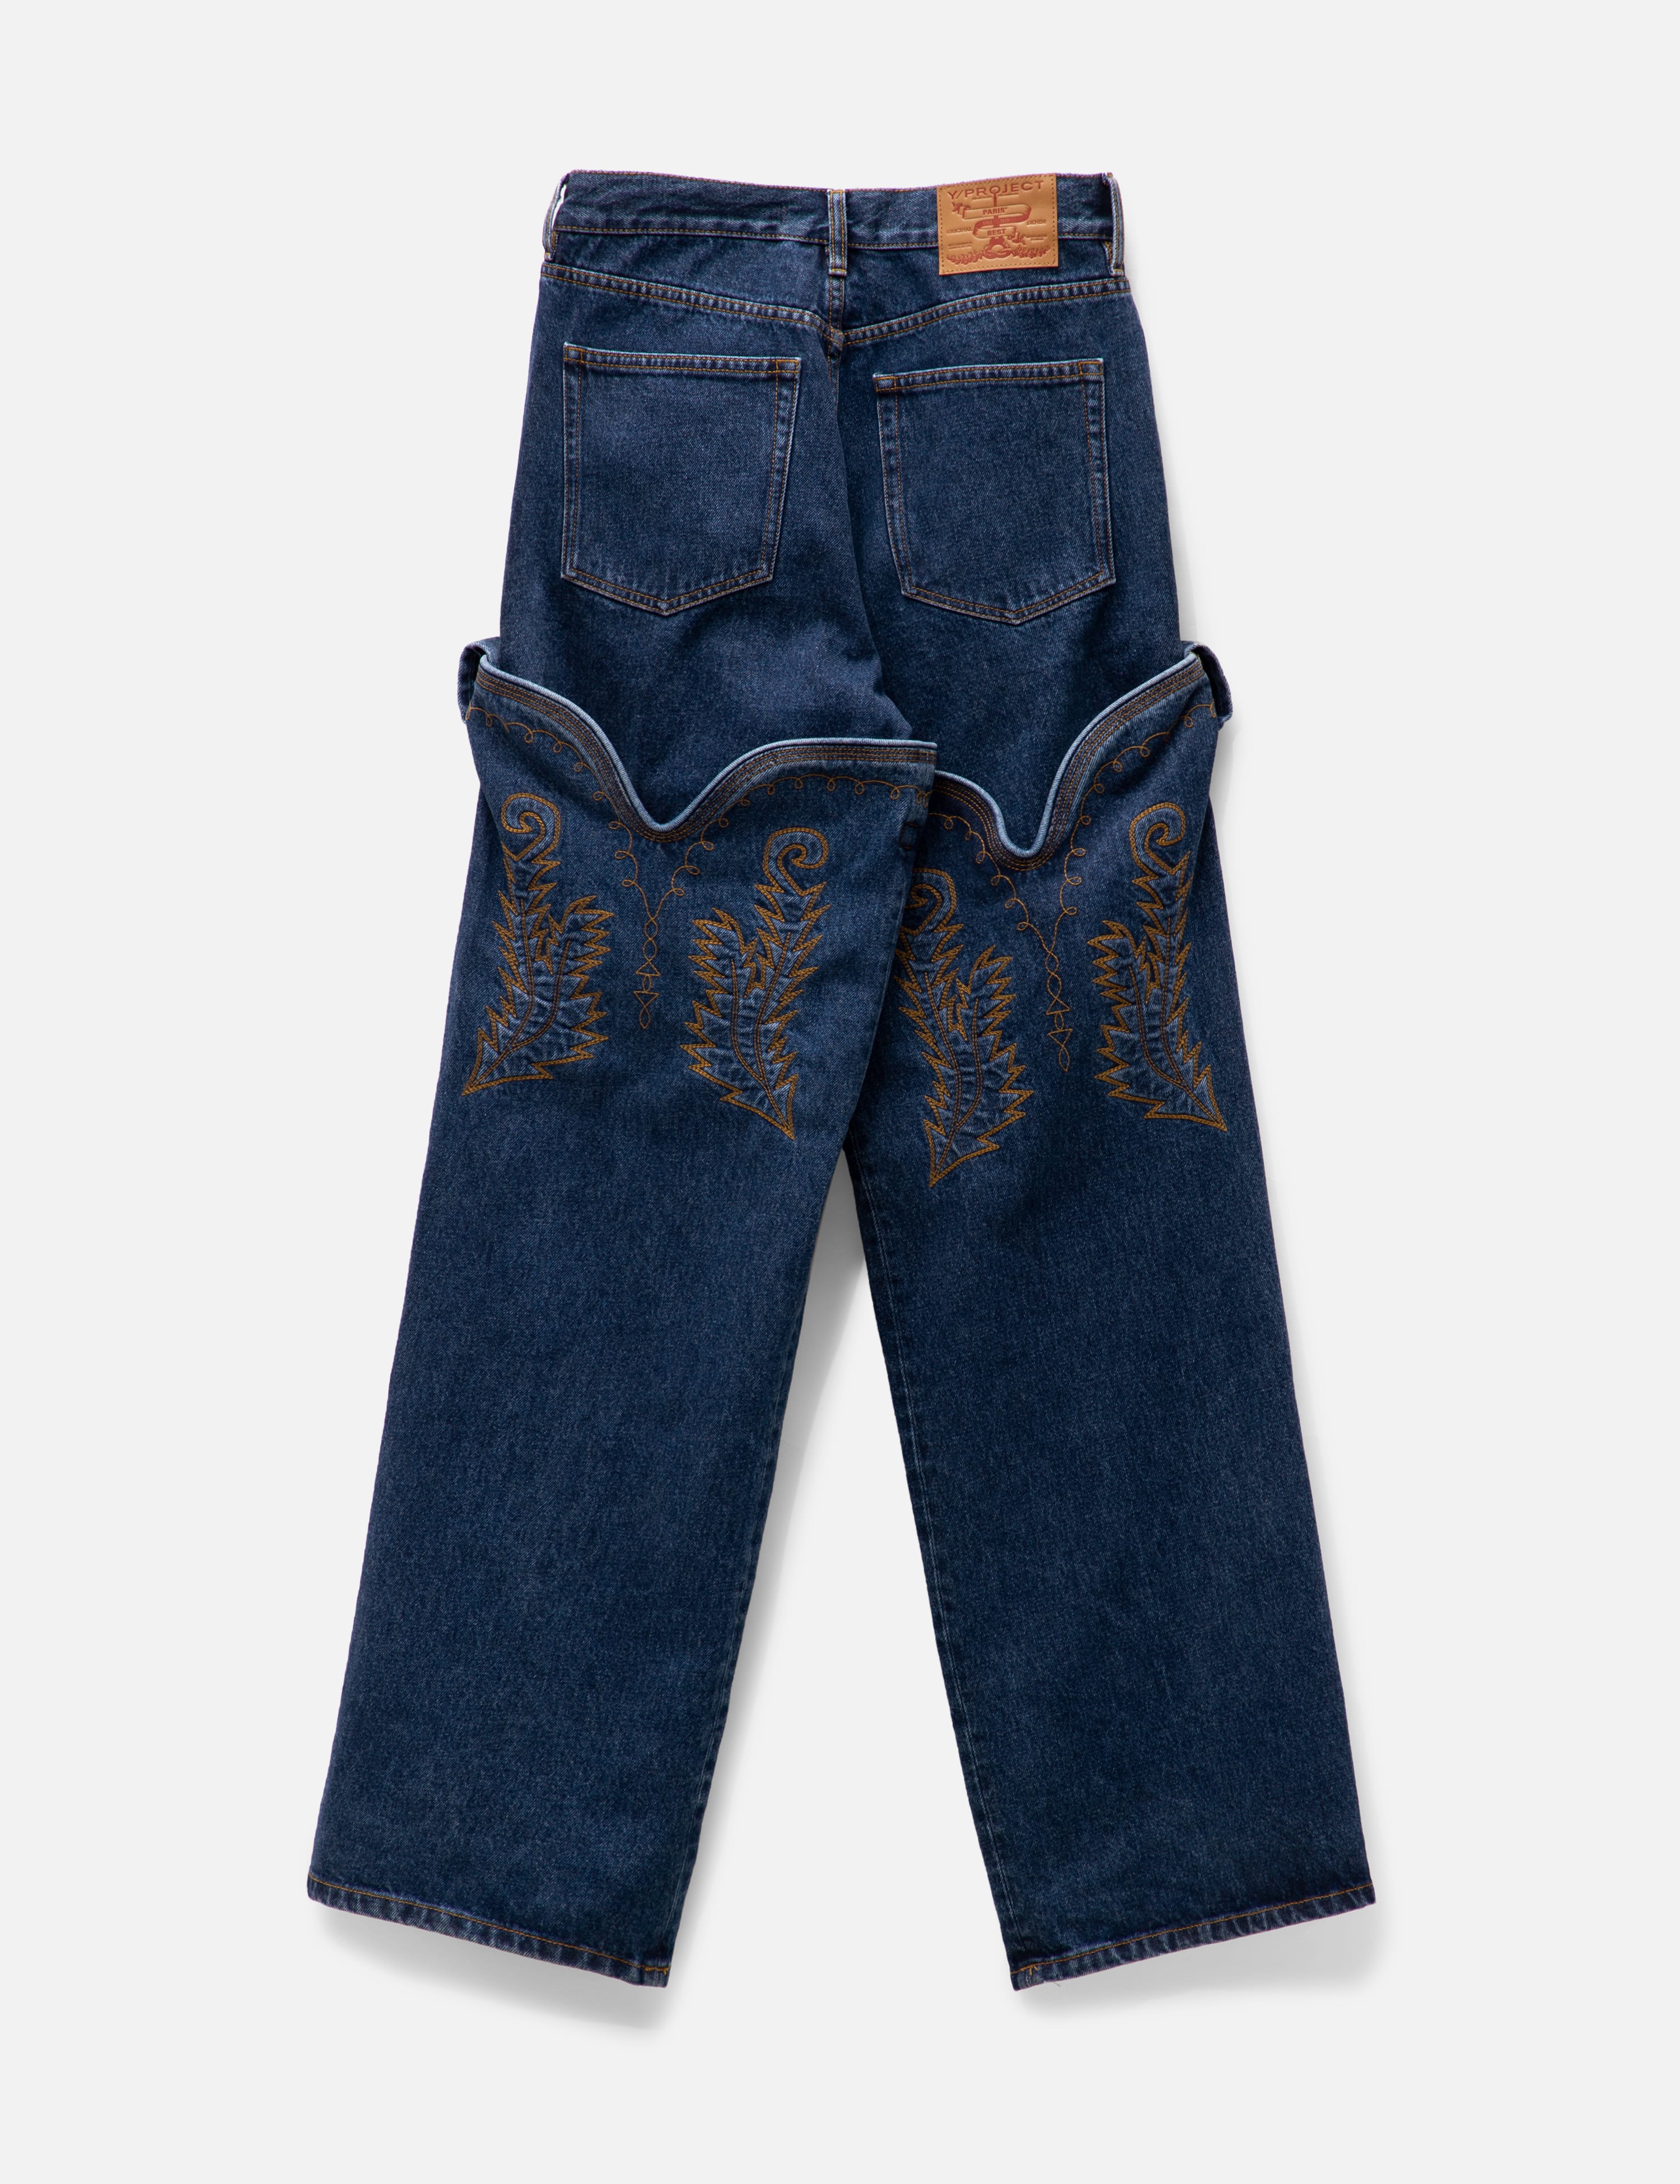 Y/PROJECT - CLASSIC MAXI COWBOY CUFF JEANS | HBX - Globally